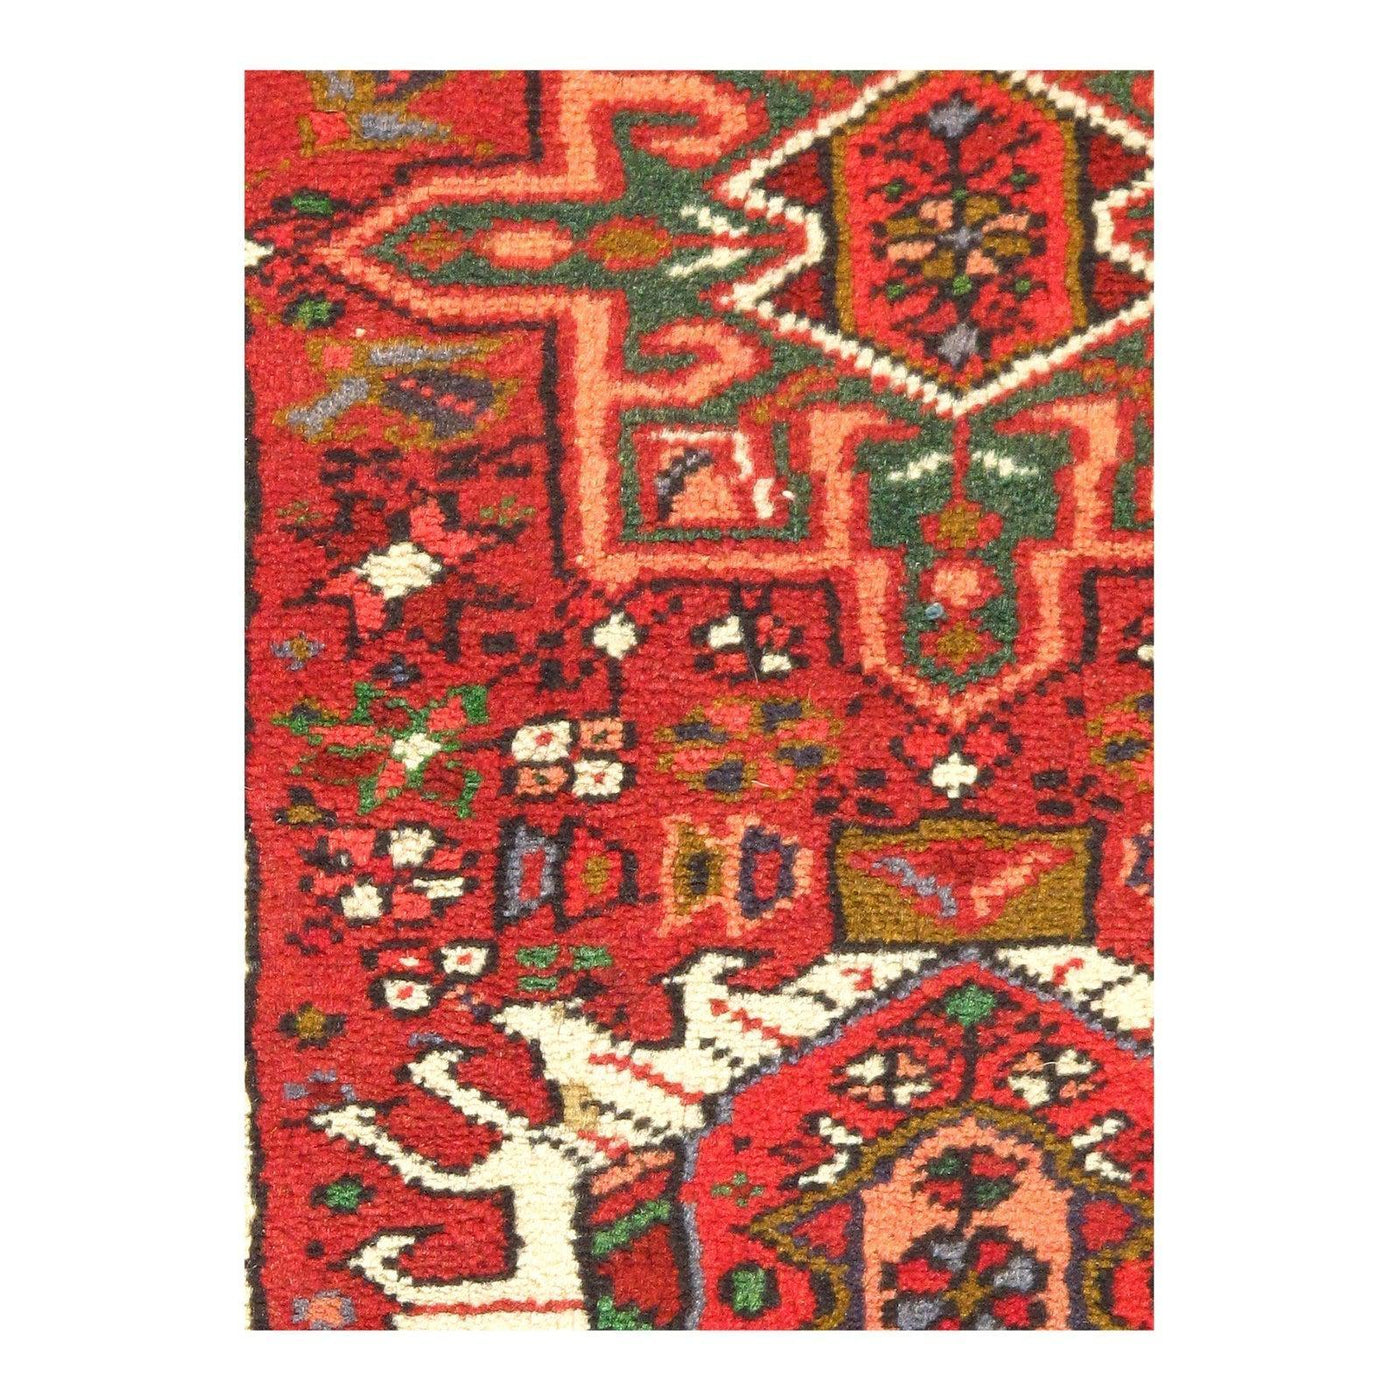 Canvello Semi-Antique Karajeh Red And Green Rug - 2'1" x 3'6"